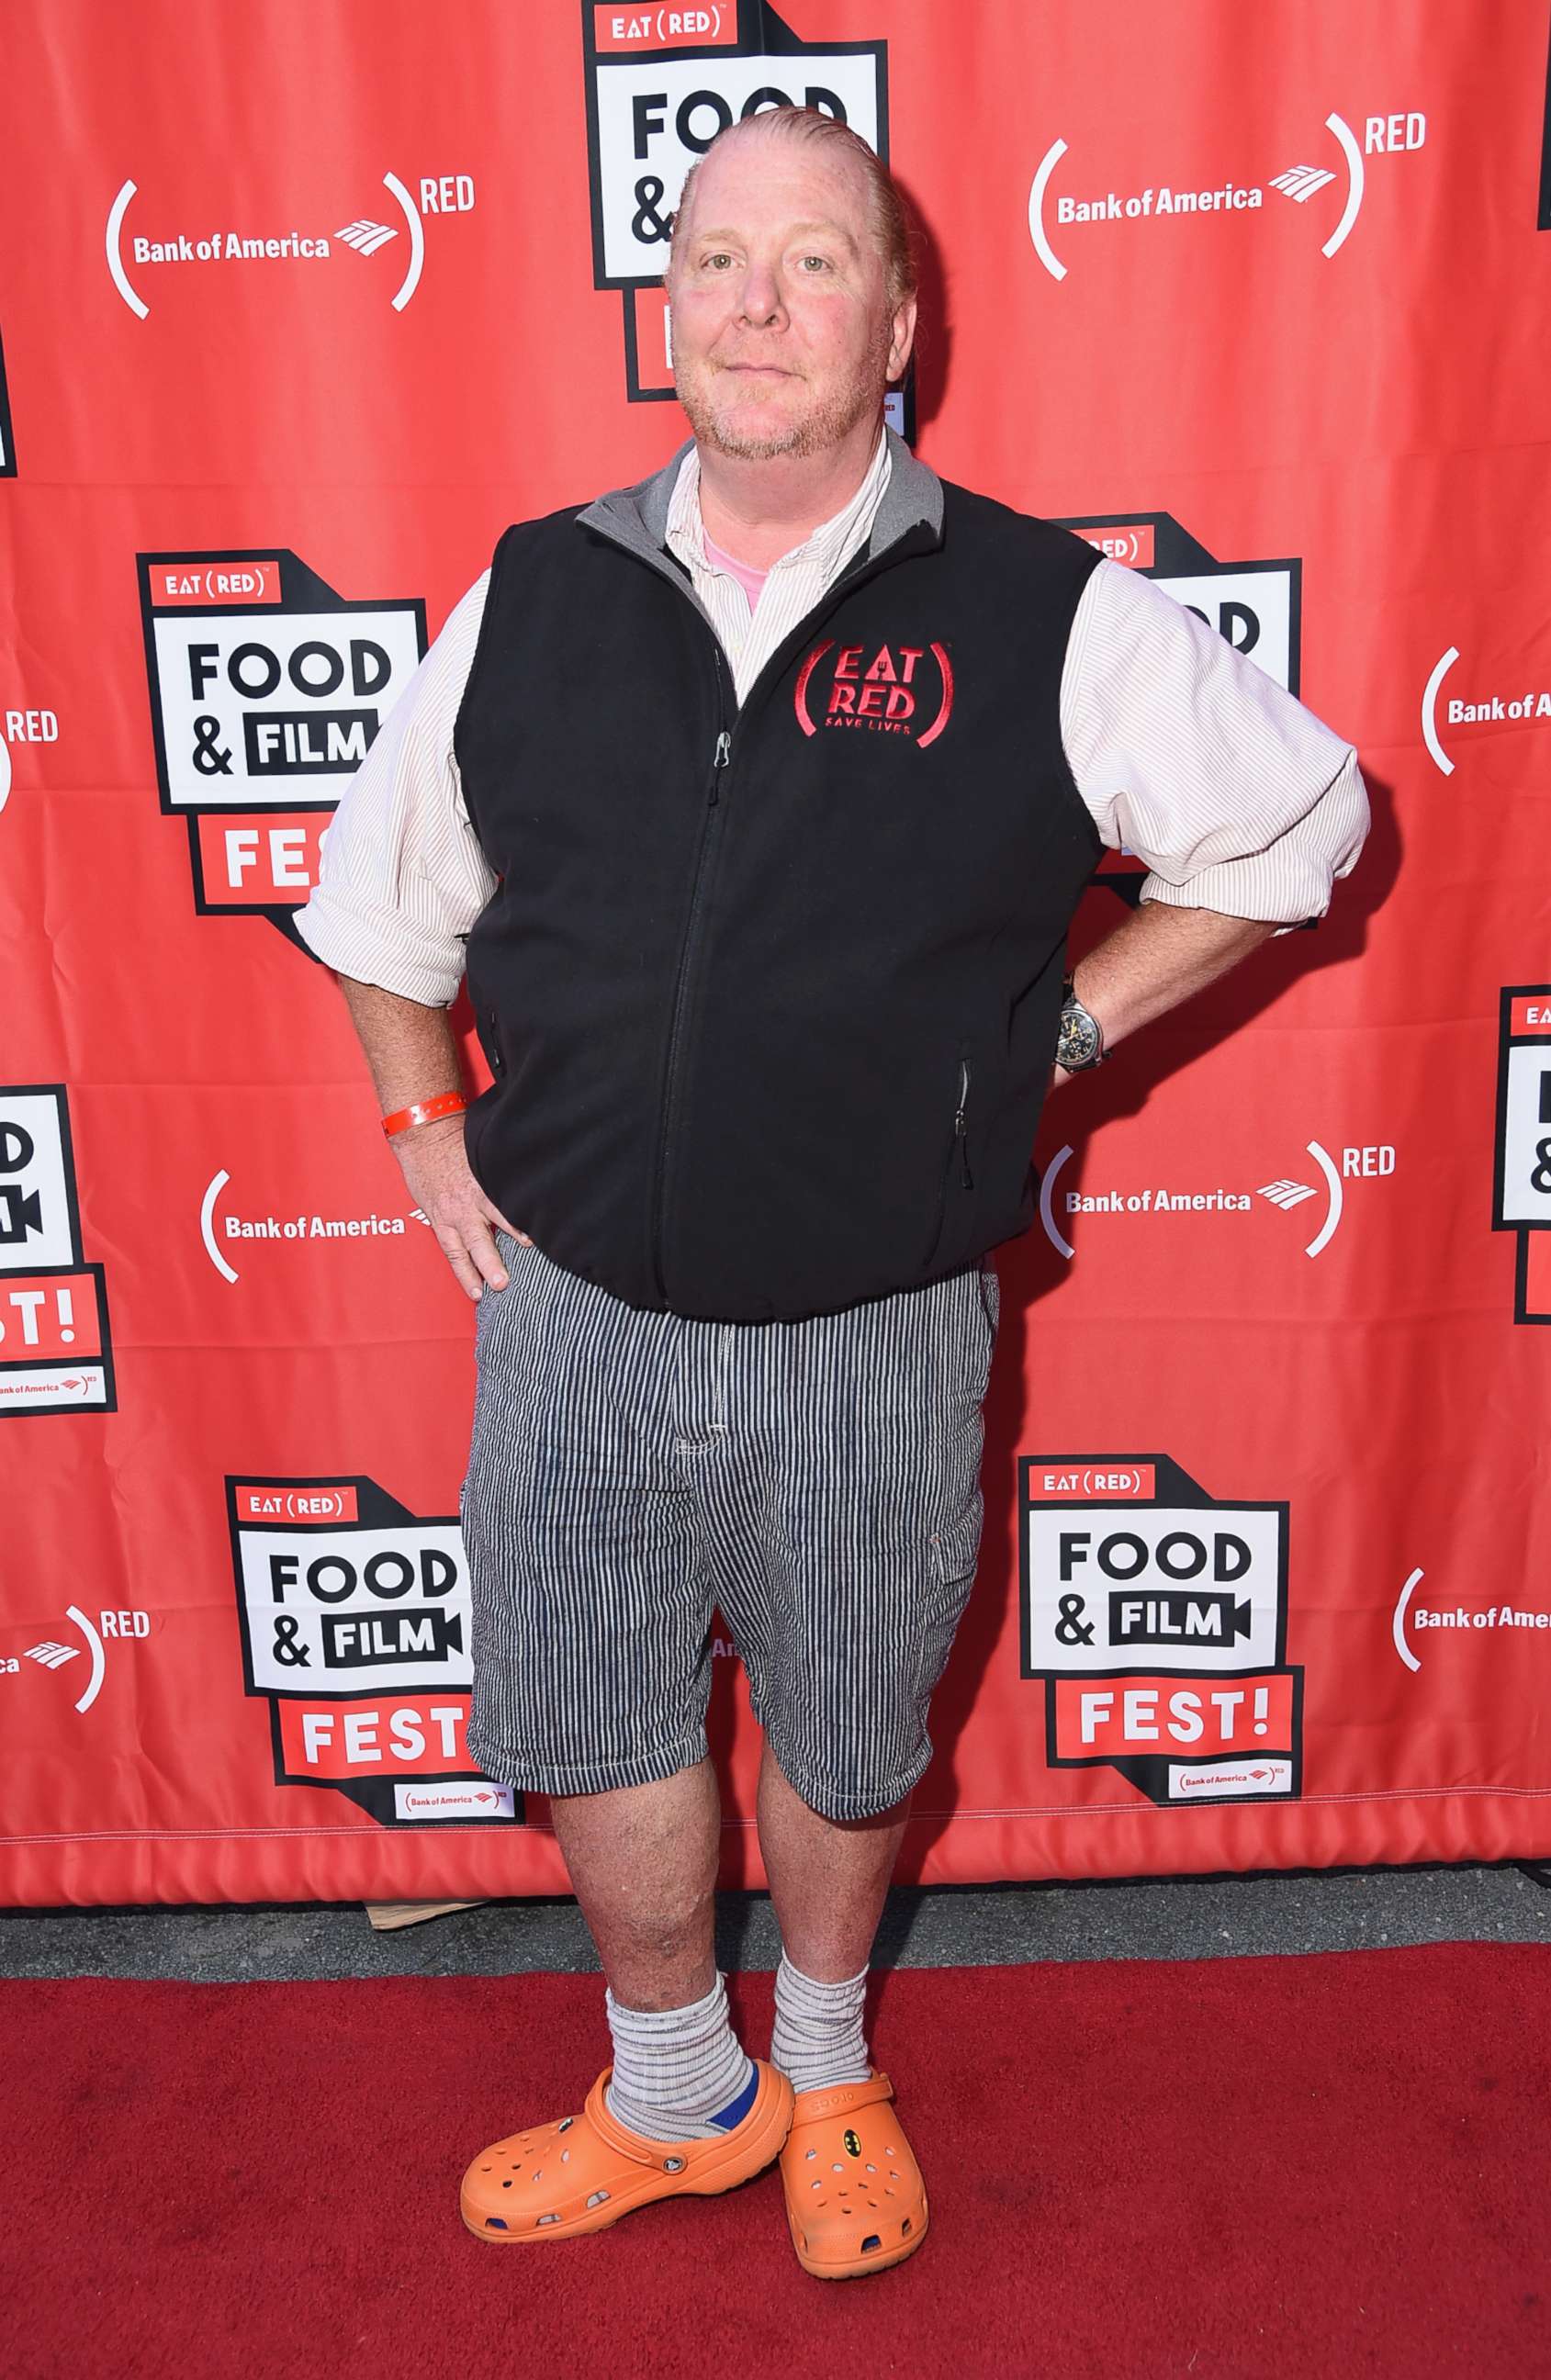 PHOTO: Chef Mario Batali arrives at EAT (RED) Food & Film Fest! at Bryant Park, June 20, 2017, in New York City.  